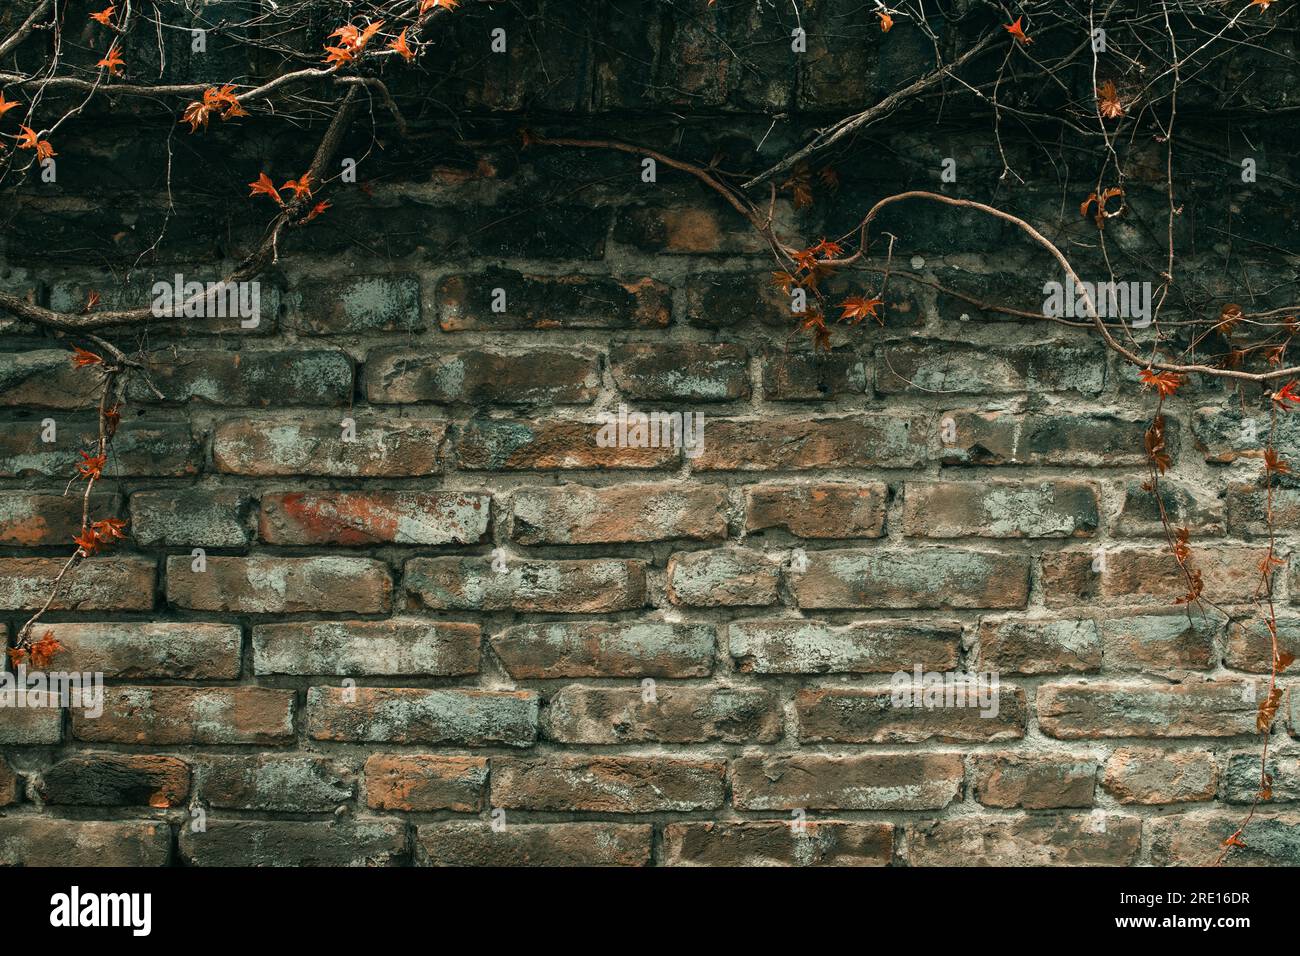 Old wall made of rustic bricks with withered creeping plant as social media background, toned image Stock Photo